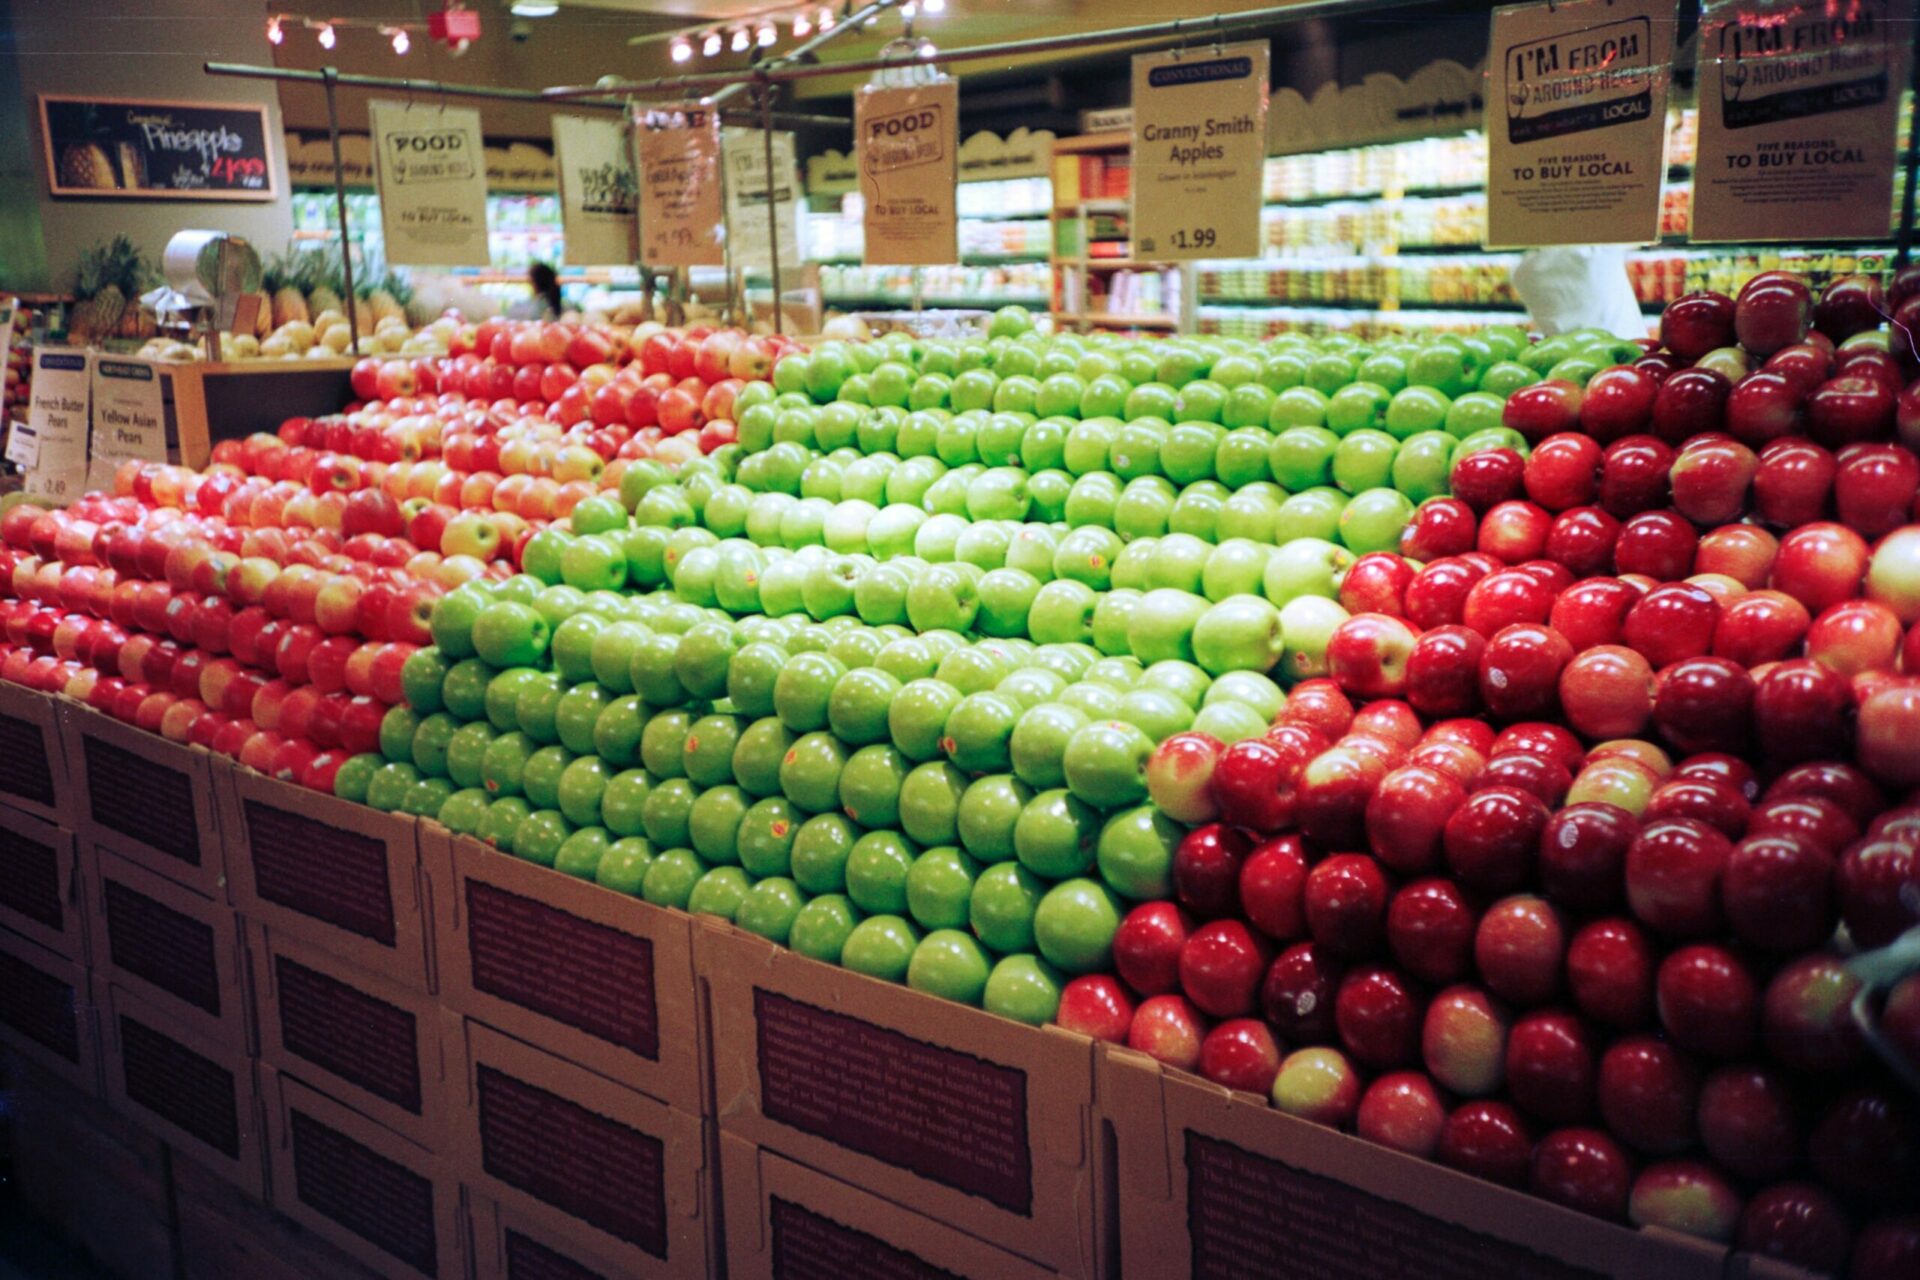 grocery store display of red and green apples